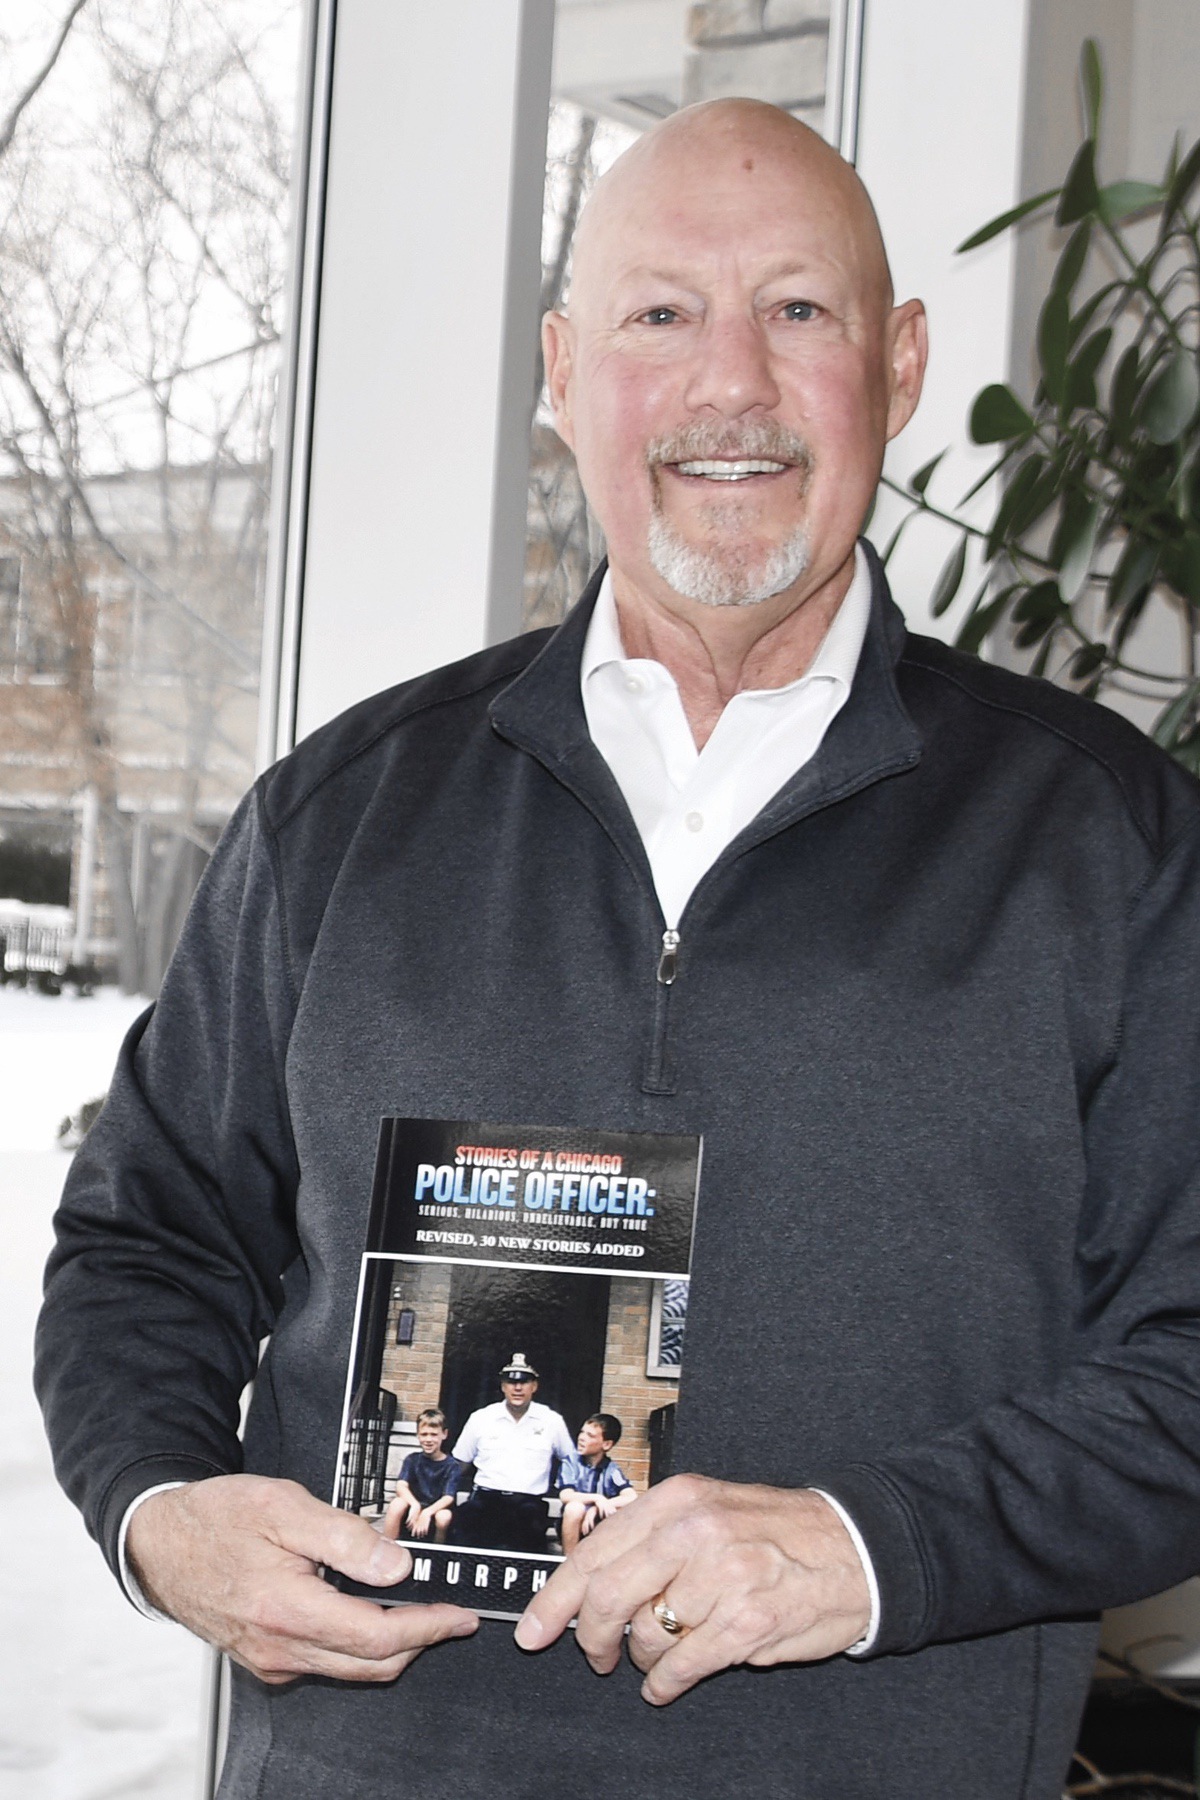 Sun City resident Larry Casey was a Chicago police officer for thirty-seven years, during which time he amassed many stories of being on the job. Whether happy or sad, you’ll discover the life of a police officer in Casey’s new book. (Photo by Christine Such/My Sun Day News)